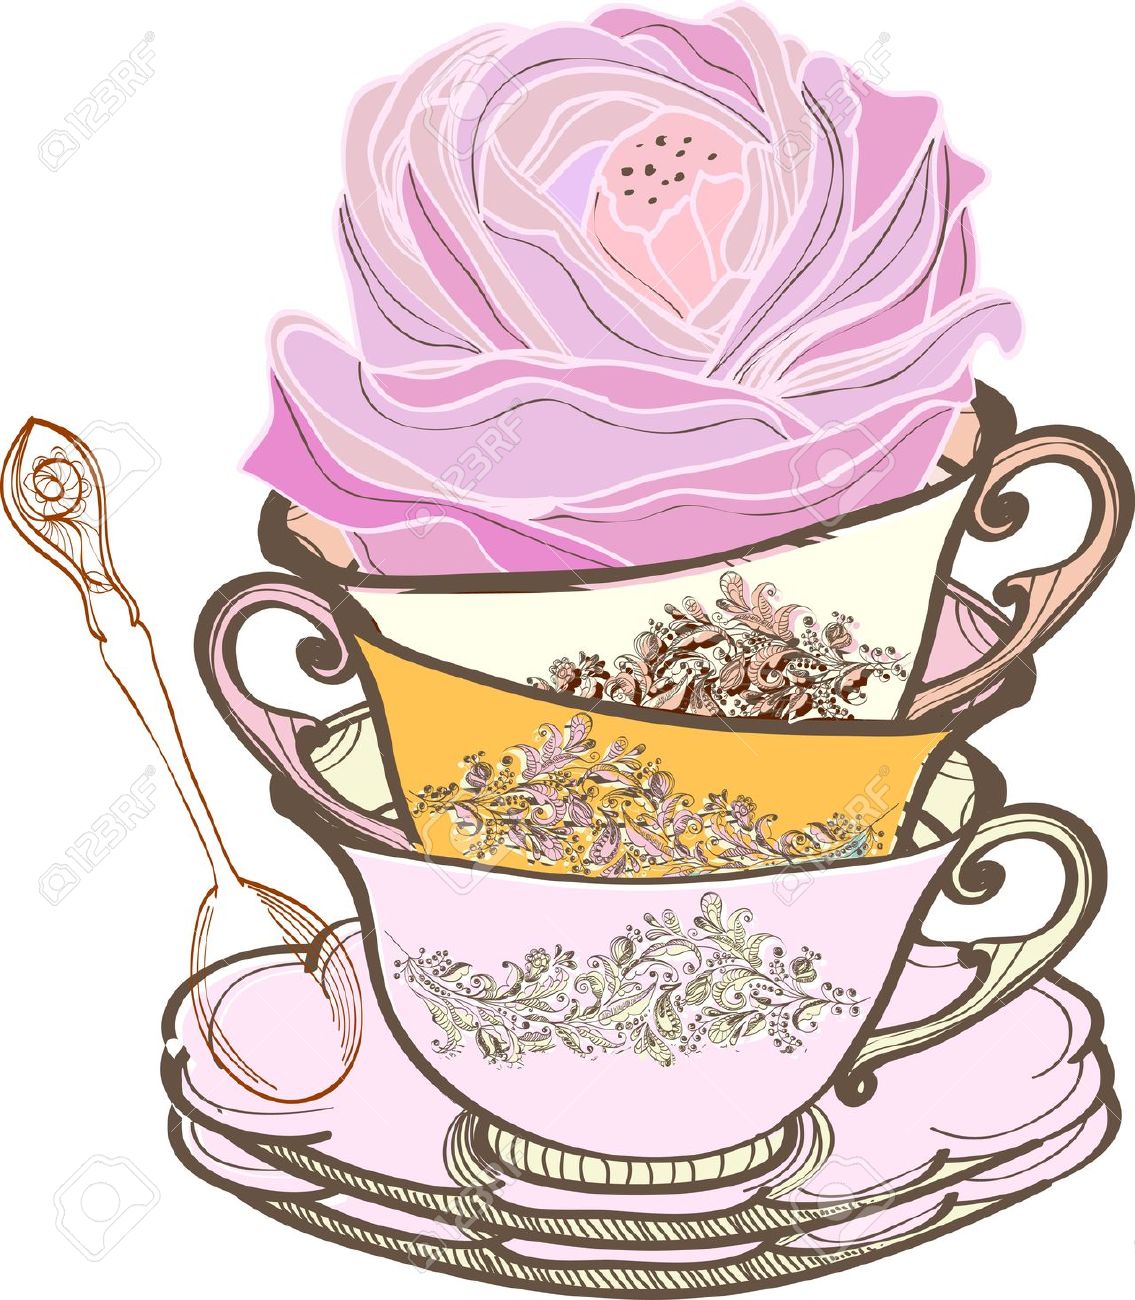 tea party: tea cup background with spoon and flower, illustration